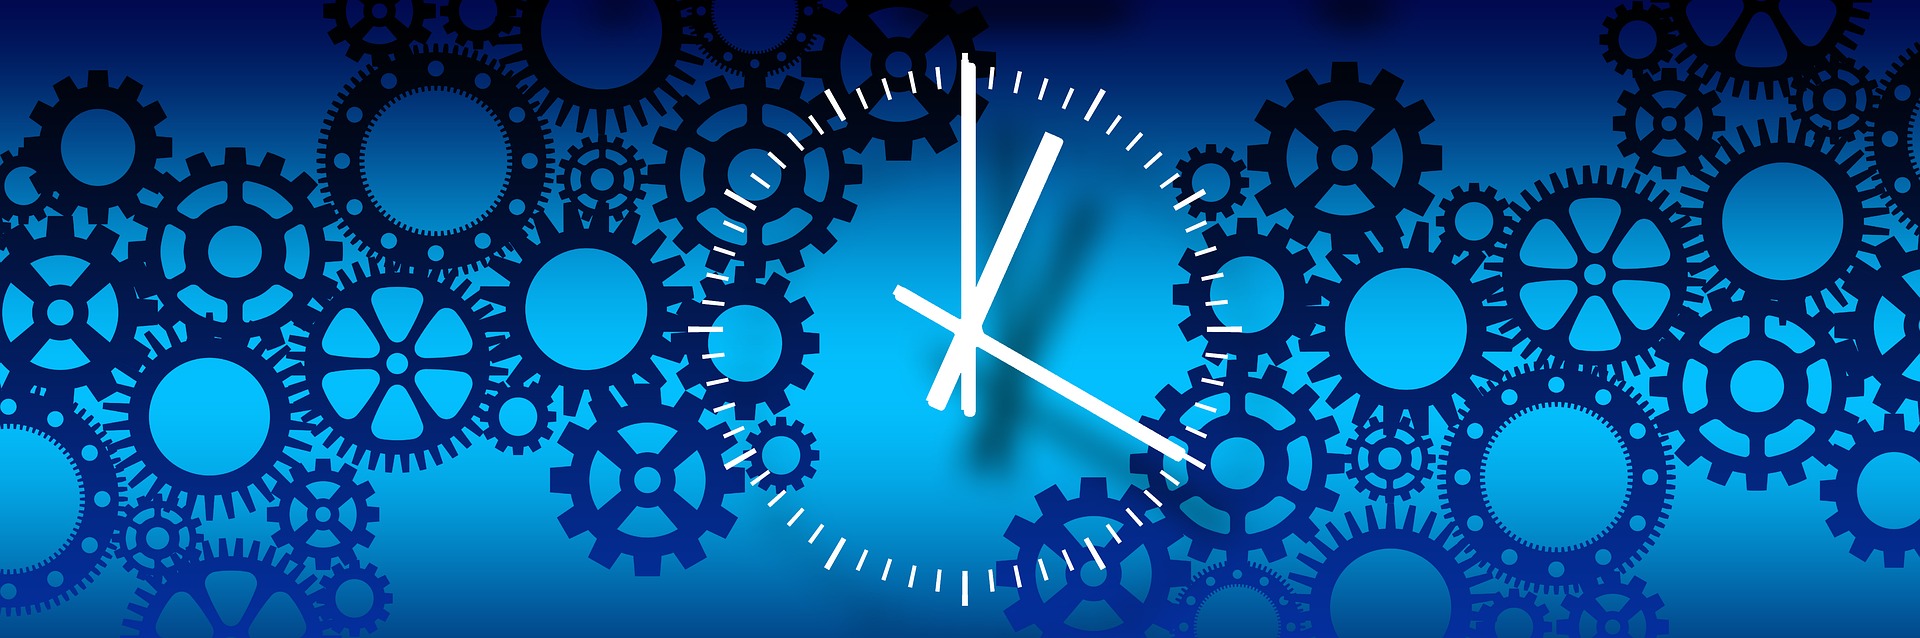 analog clock on blue image of gears